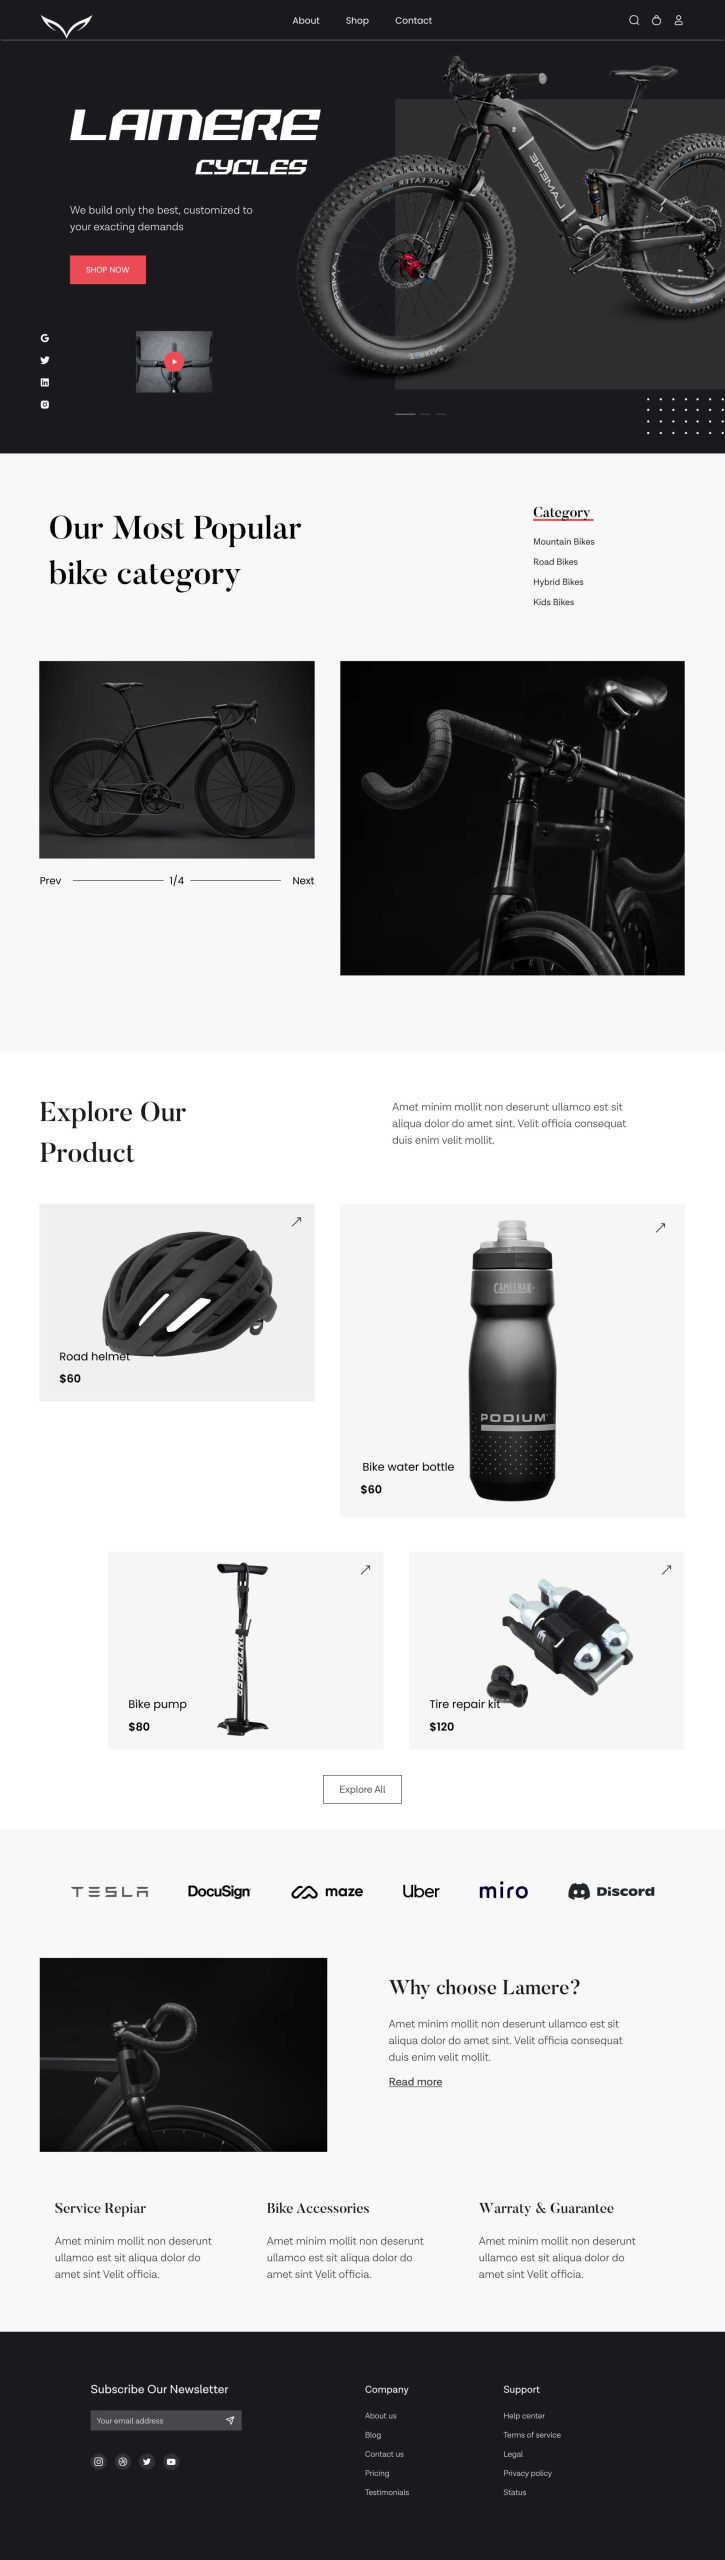 Recent work of glyceria, attractive, unique and eye catching design of WordPress, create your responsive ecommerce website now, create vehicle design from glyceria, high functionality with seo and speed optimization, glyceria.com, glyceria